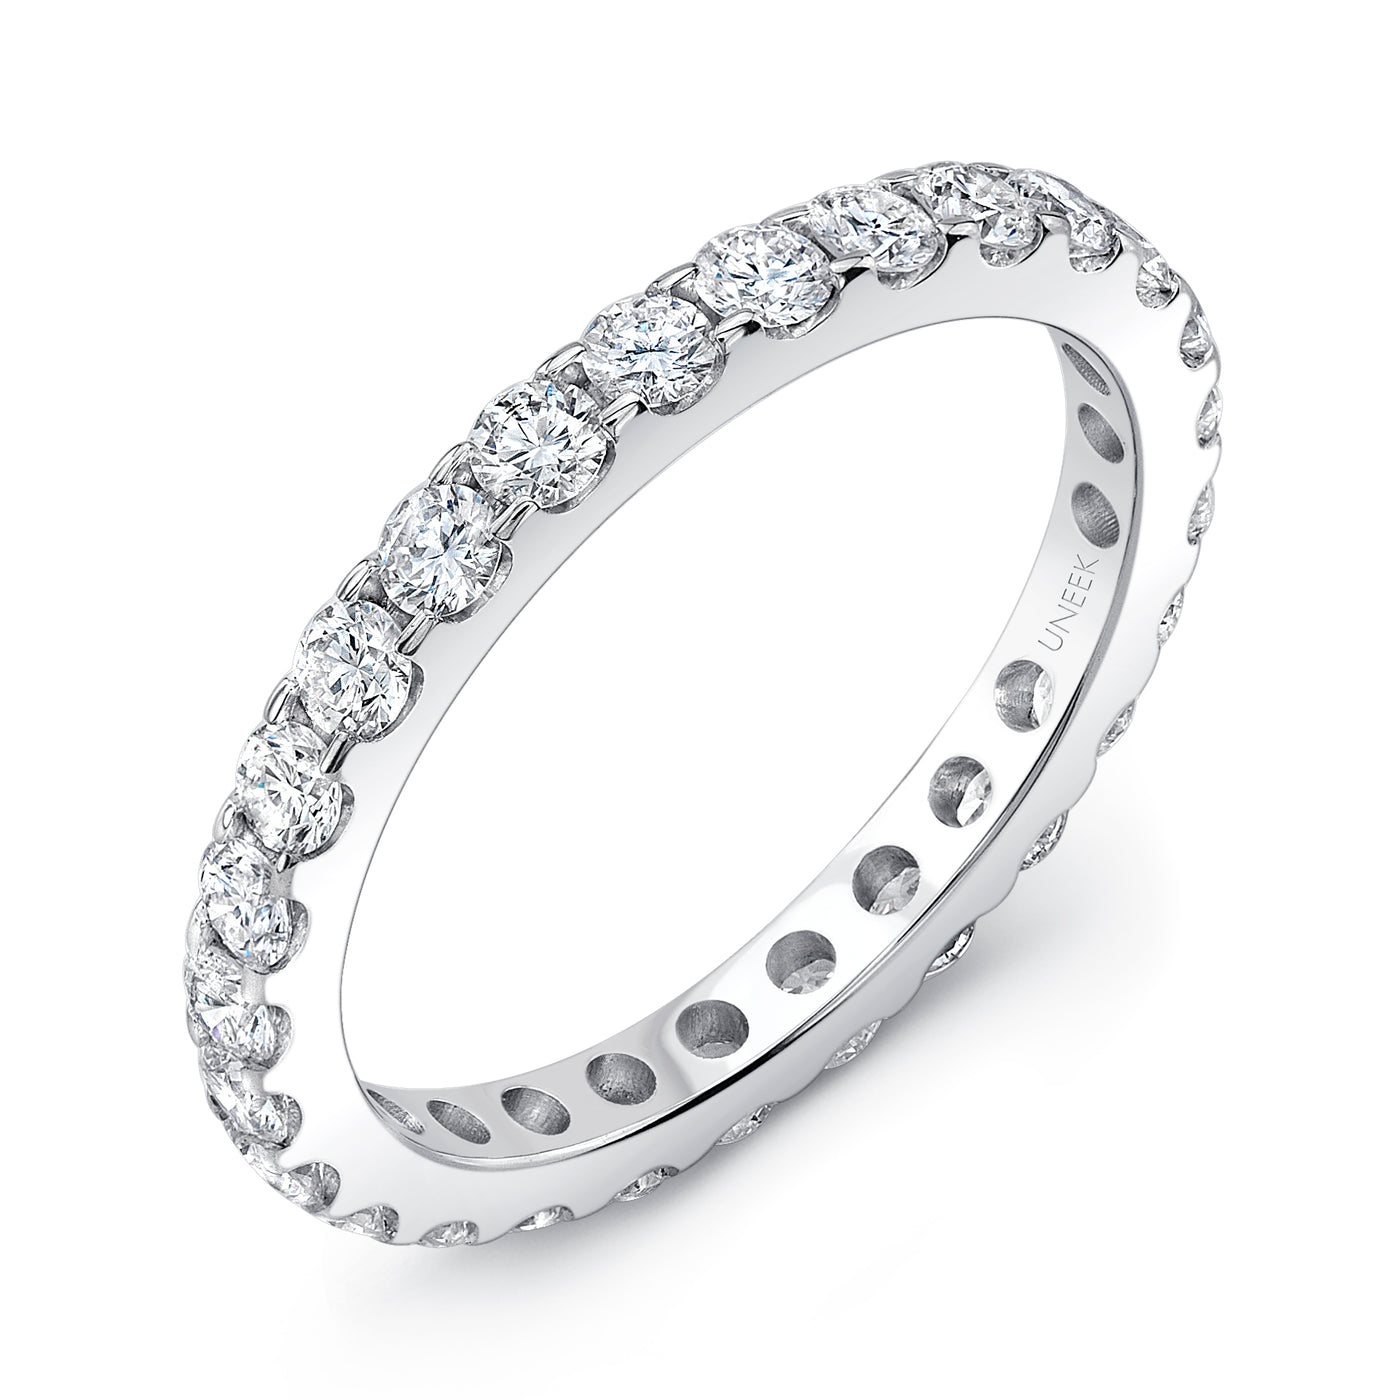 Apparel & Accessories > Jewelry > Rings Uneek Round Diamond Eternity Band 1.04 Carats in 14K White Gold Pierce Custom Jewelers